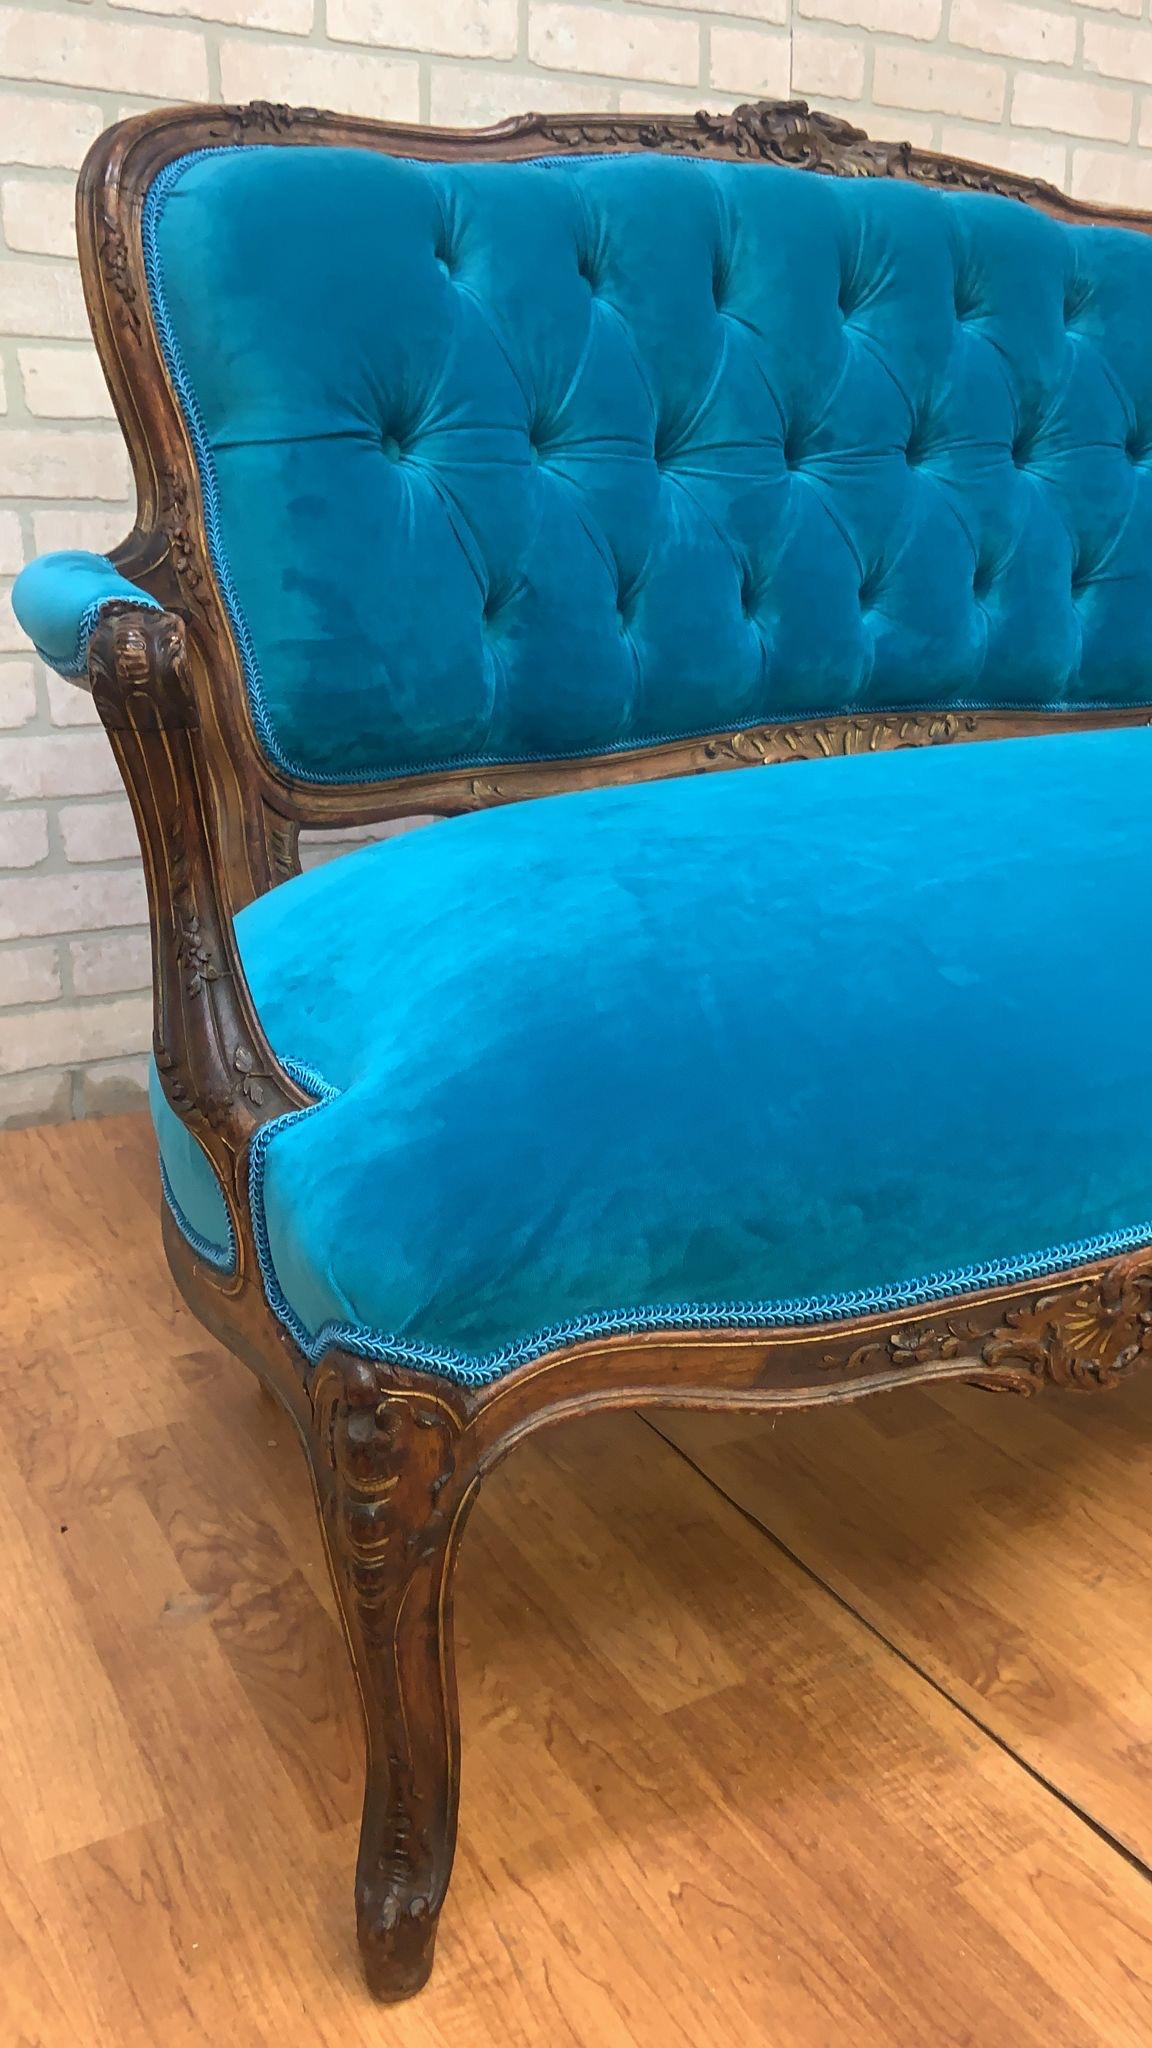 Antique French Louis XV Style Hand Carved Walnut Floral Motif Tufted Back Settee Newly Reupholstered in a Teal Velvet in the Front with a Patterned Gold and Teal Velvet in the Back 

A gorgeous settee of fine quality with beautiful floral